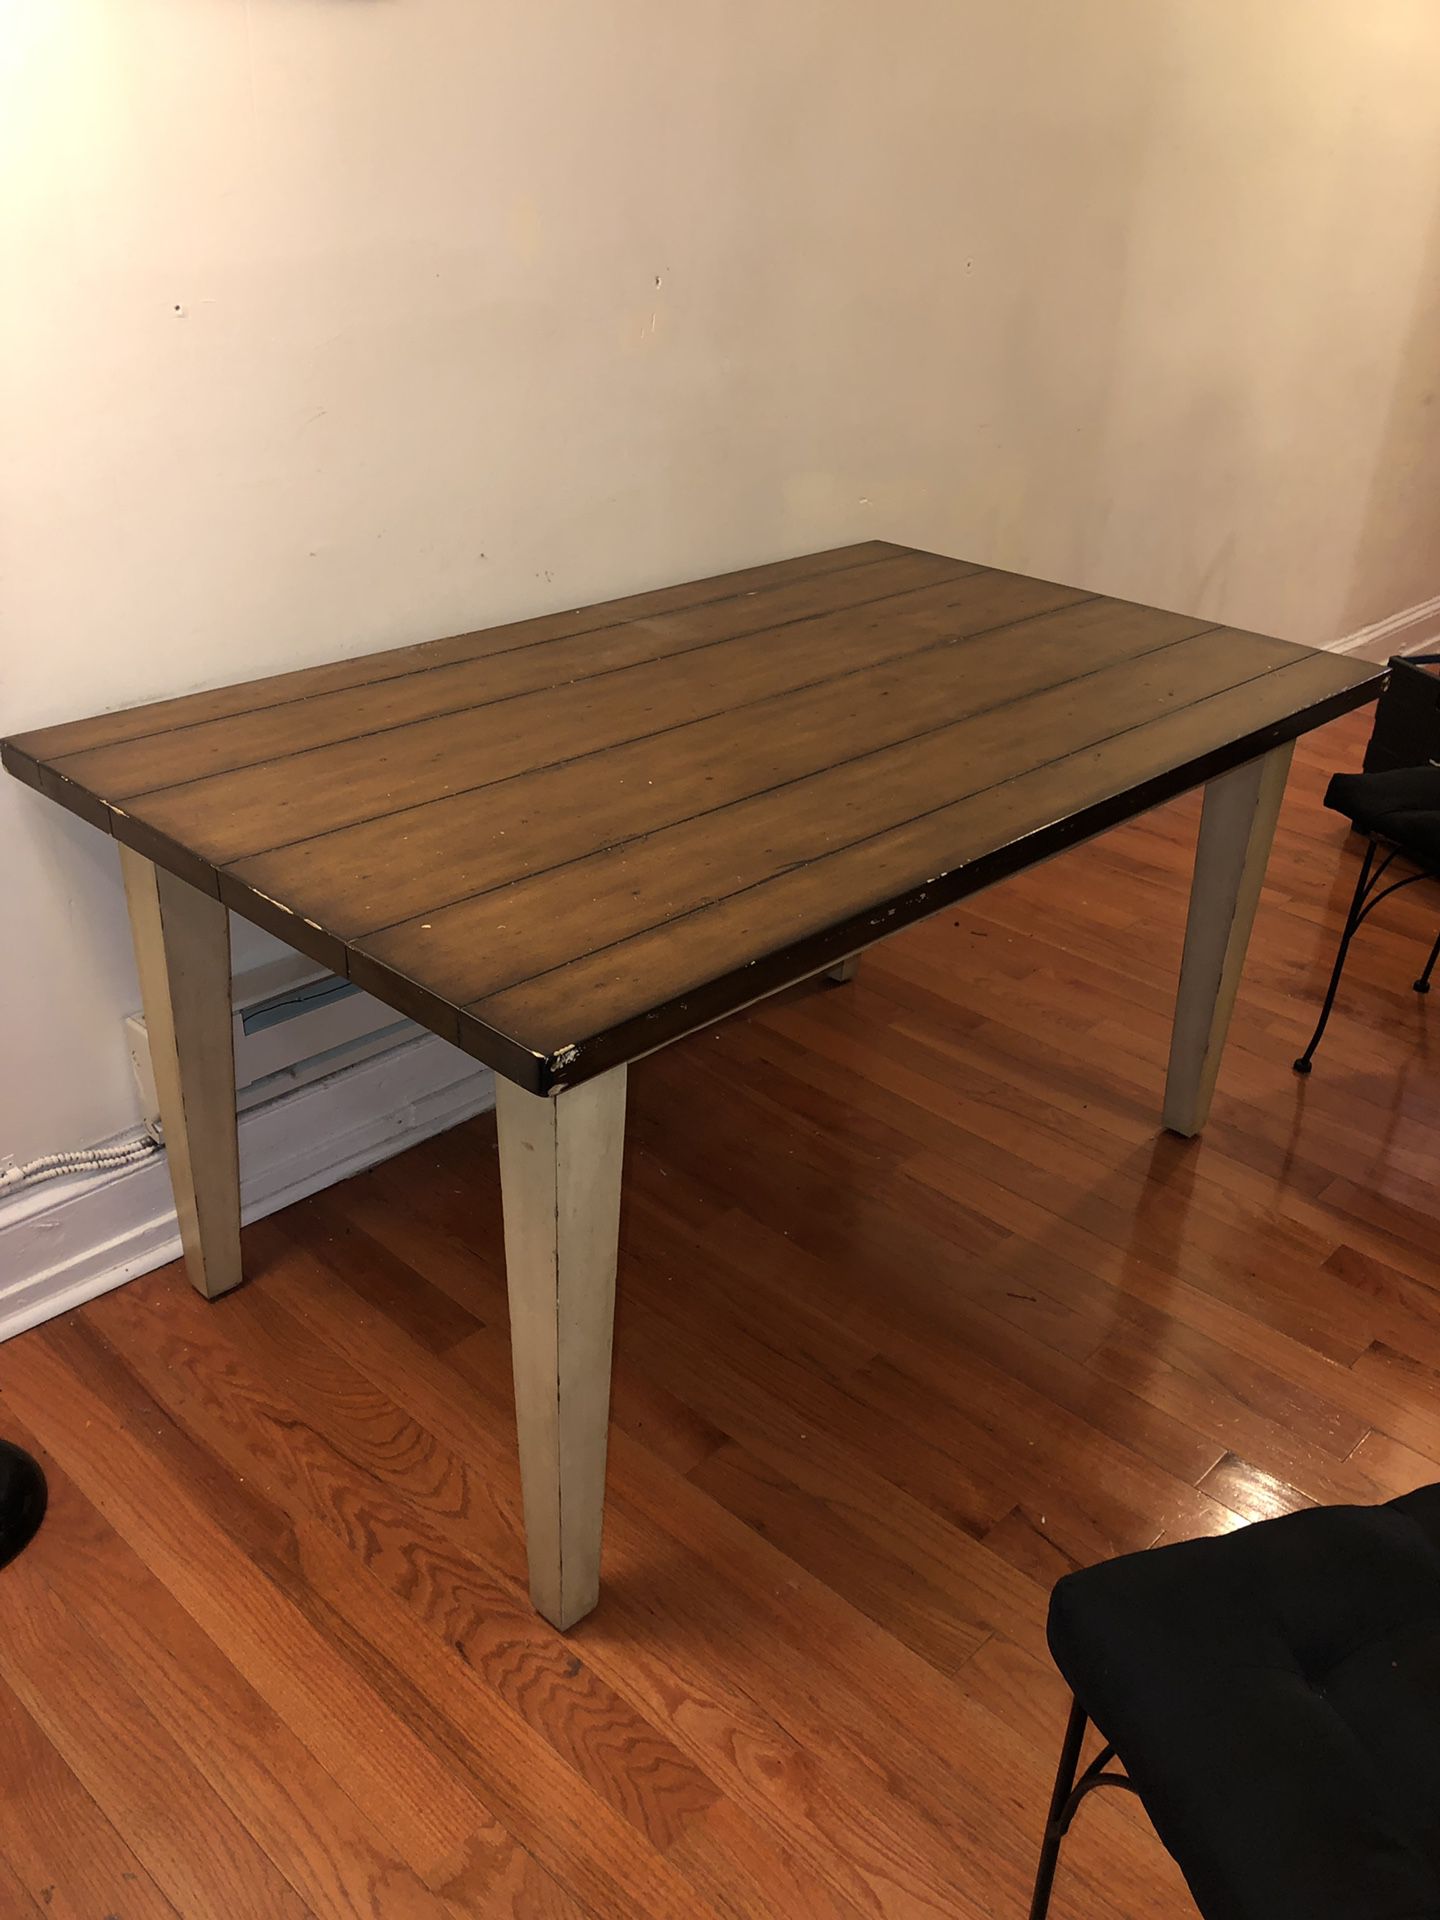 Pier 1 Imports Kitchen Table